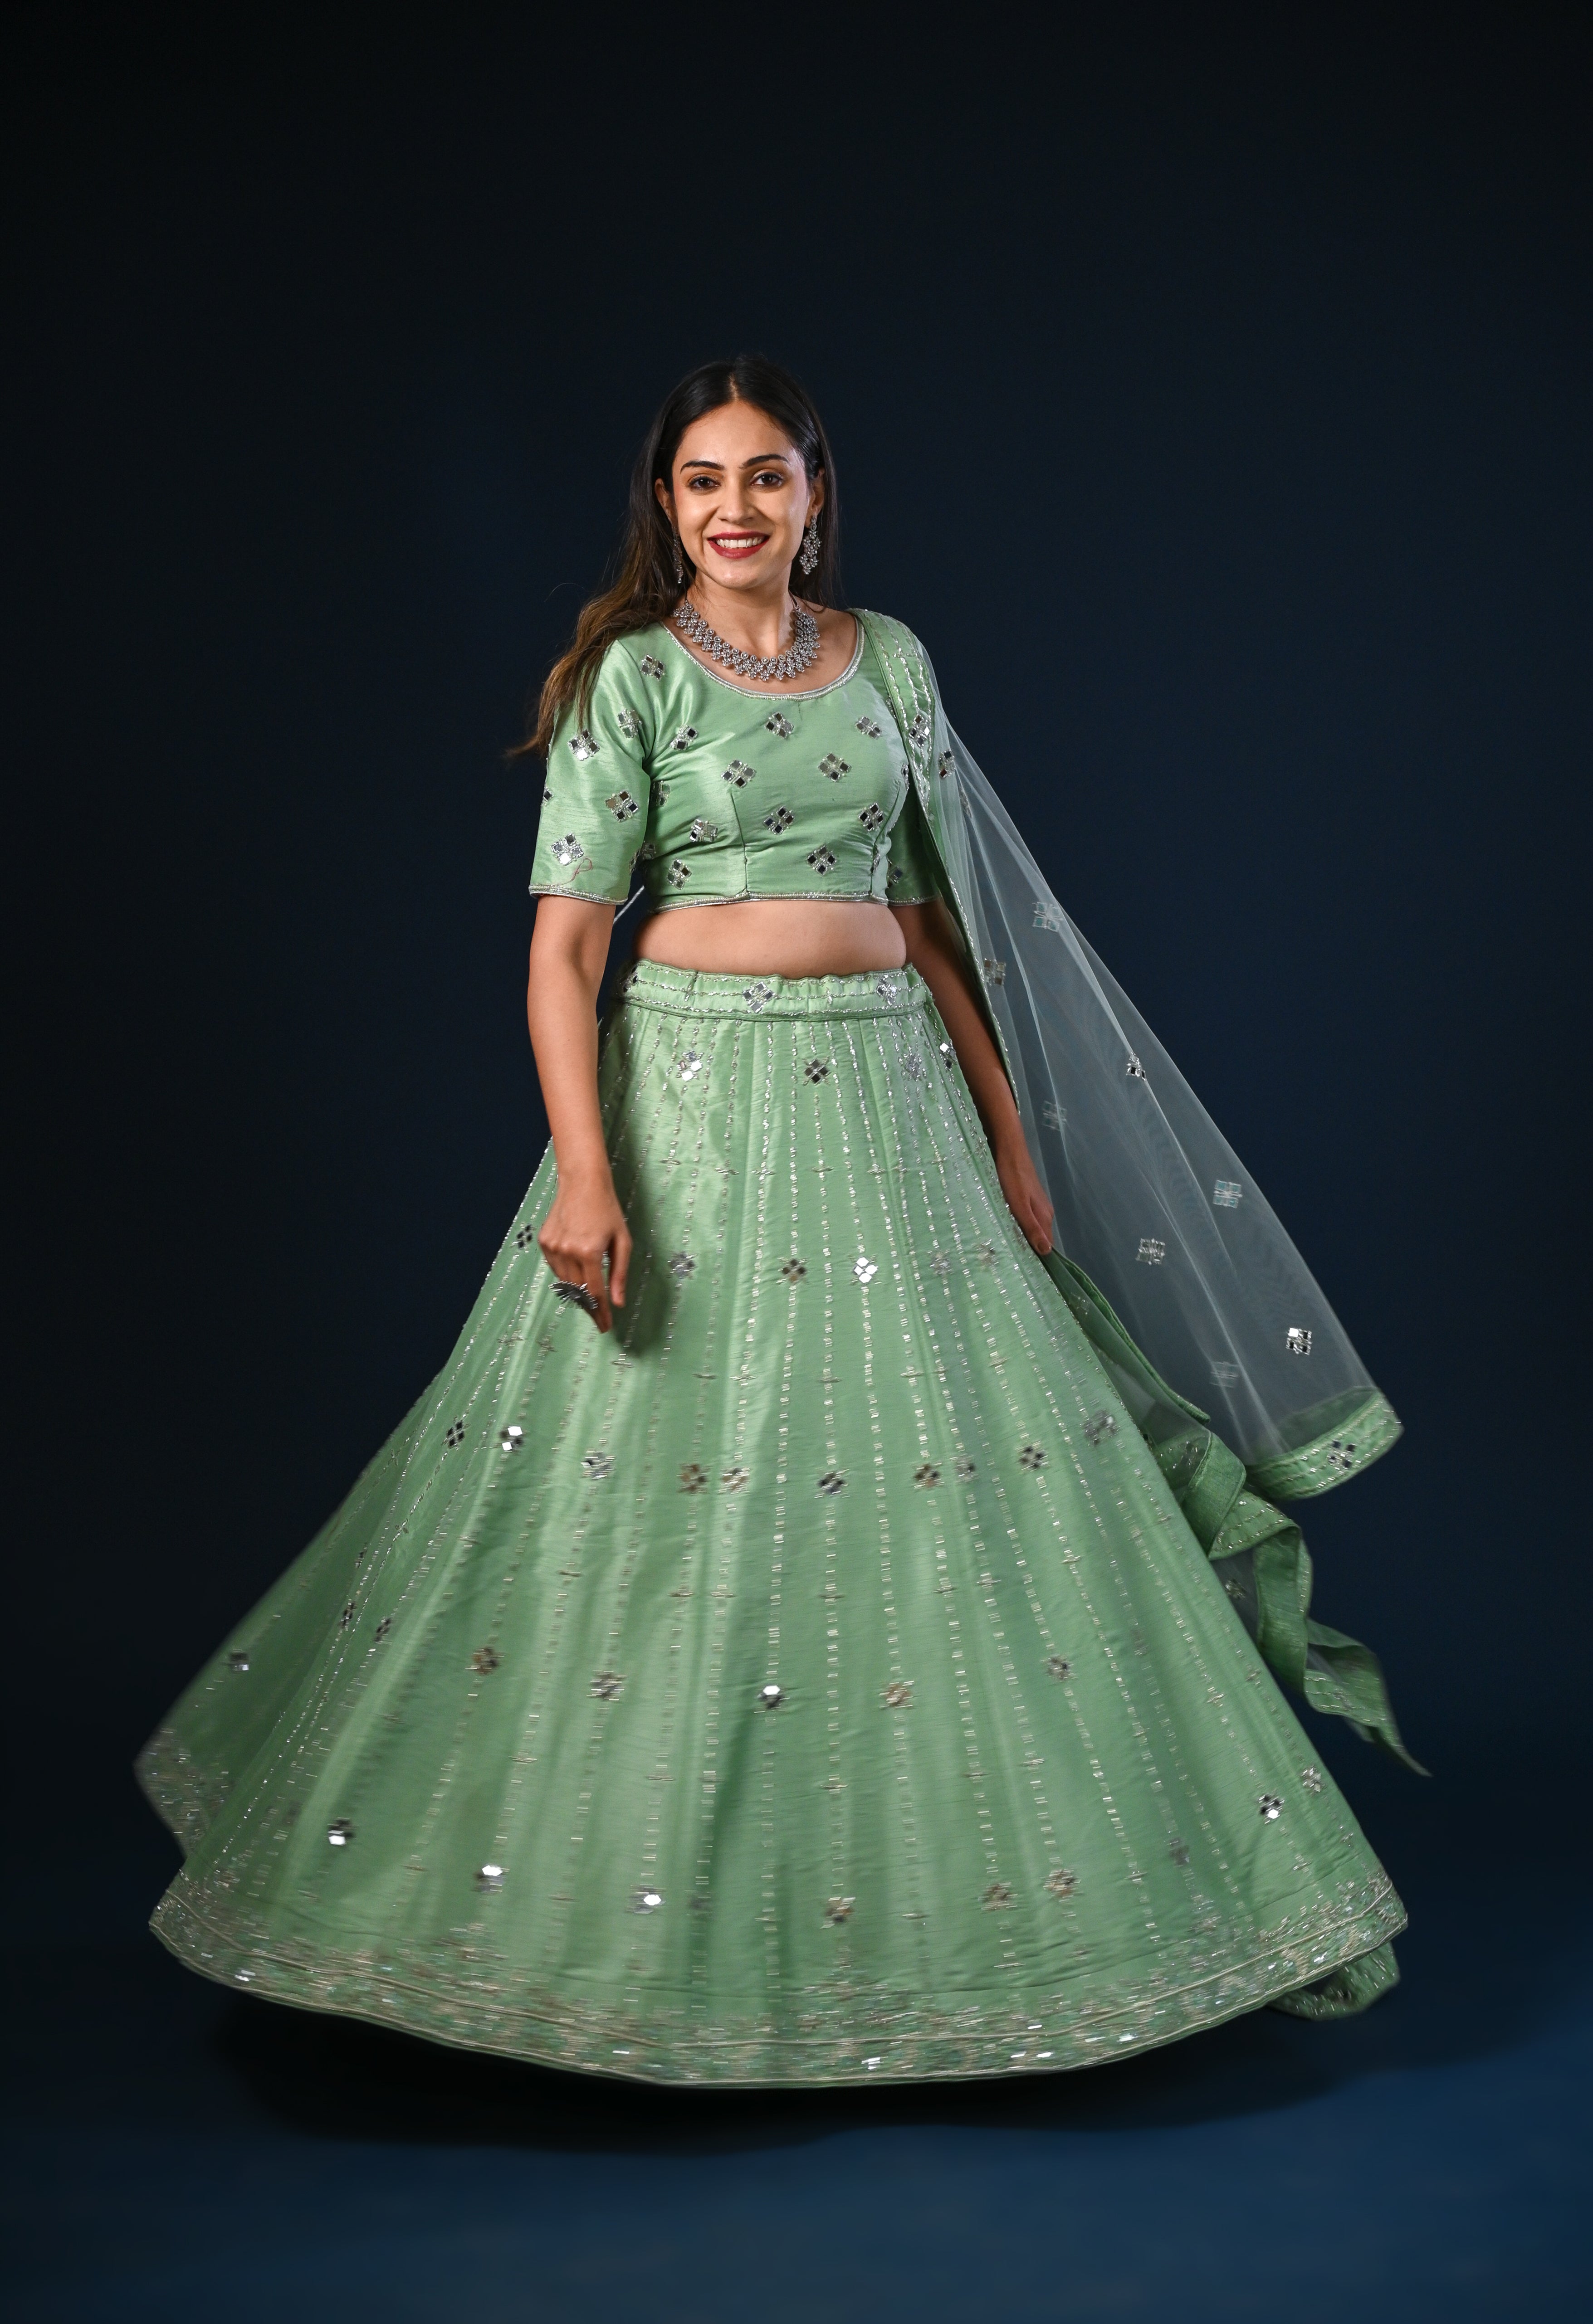 Casual Lehenga Choli for Daily Purpose at Home | Crop Top with Dupatta